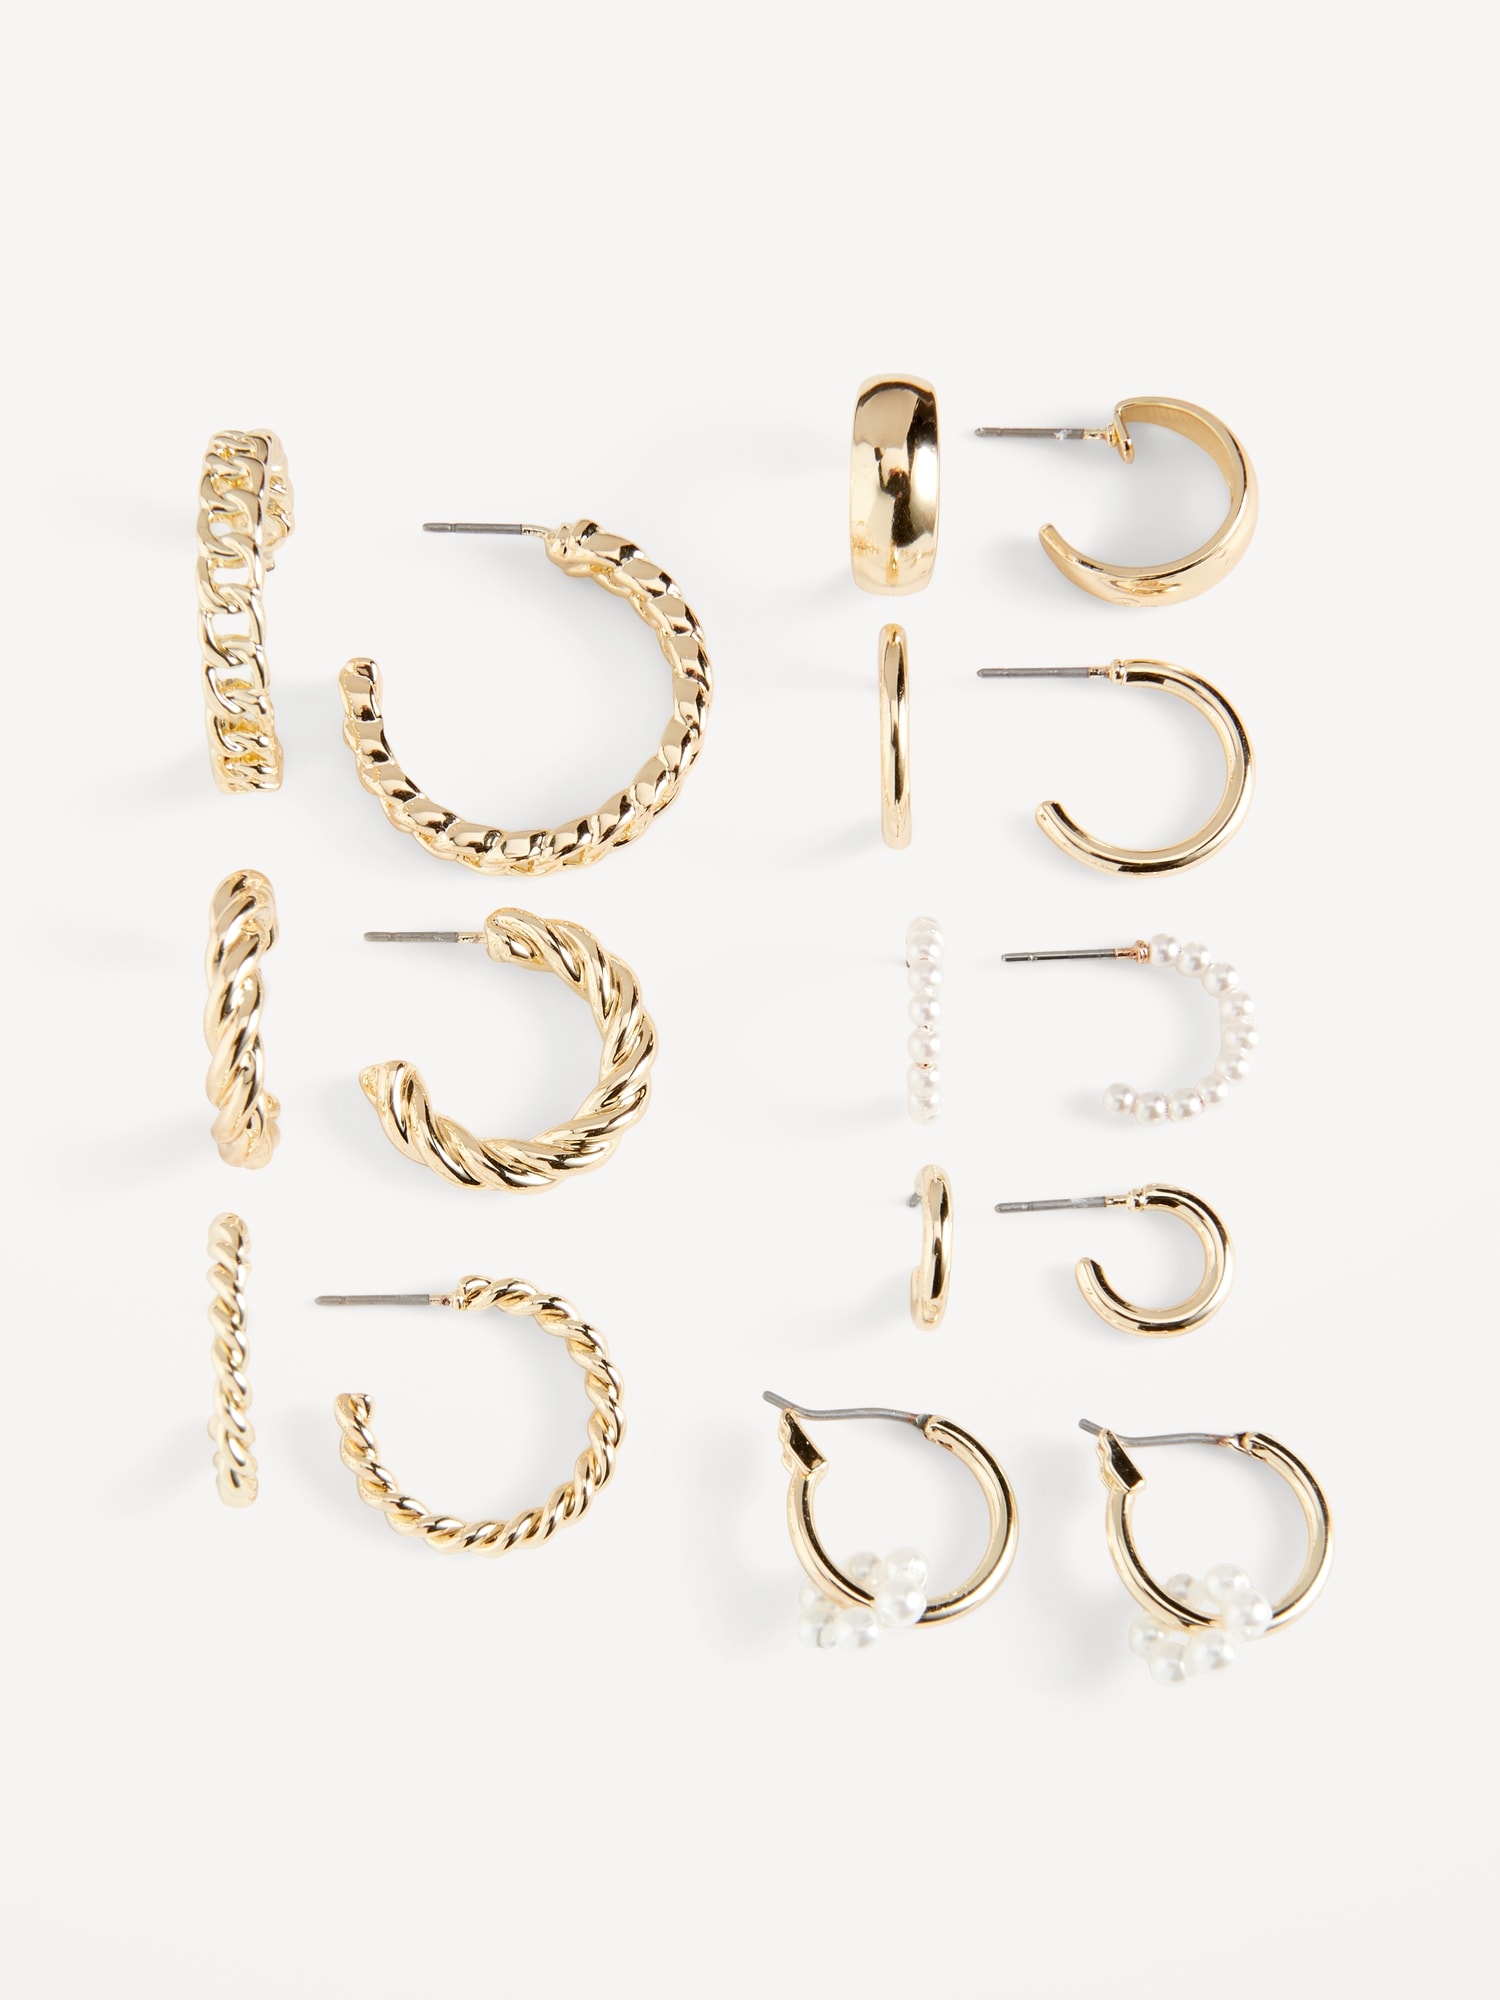 Old Navy Gold-Plated Open Hoop Earrings Variety 8-Pack for Women gold. 1